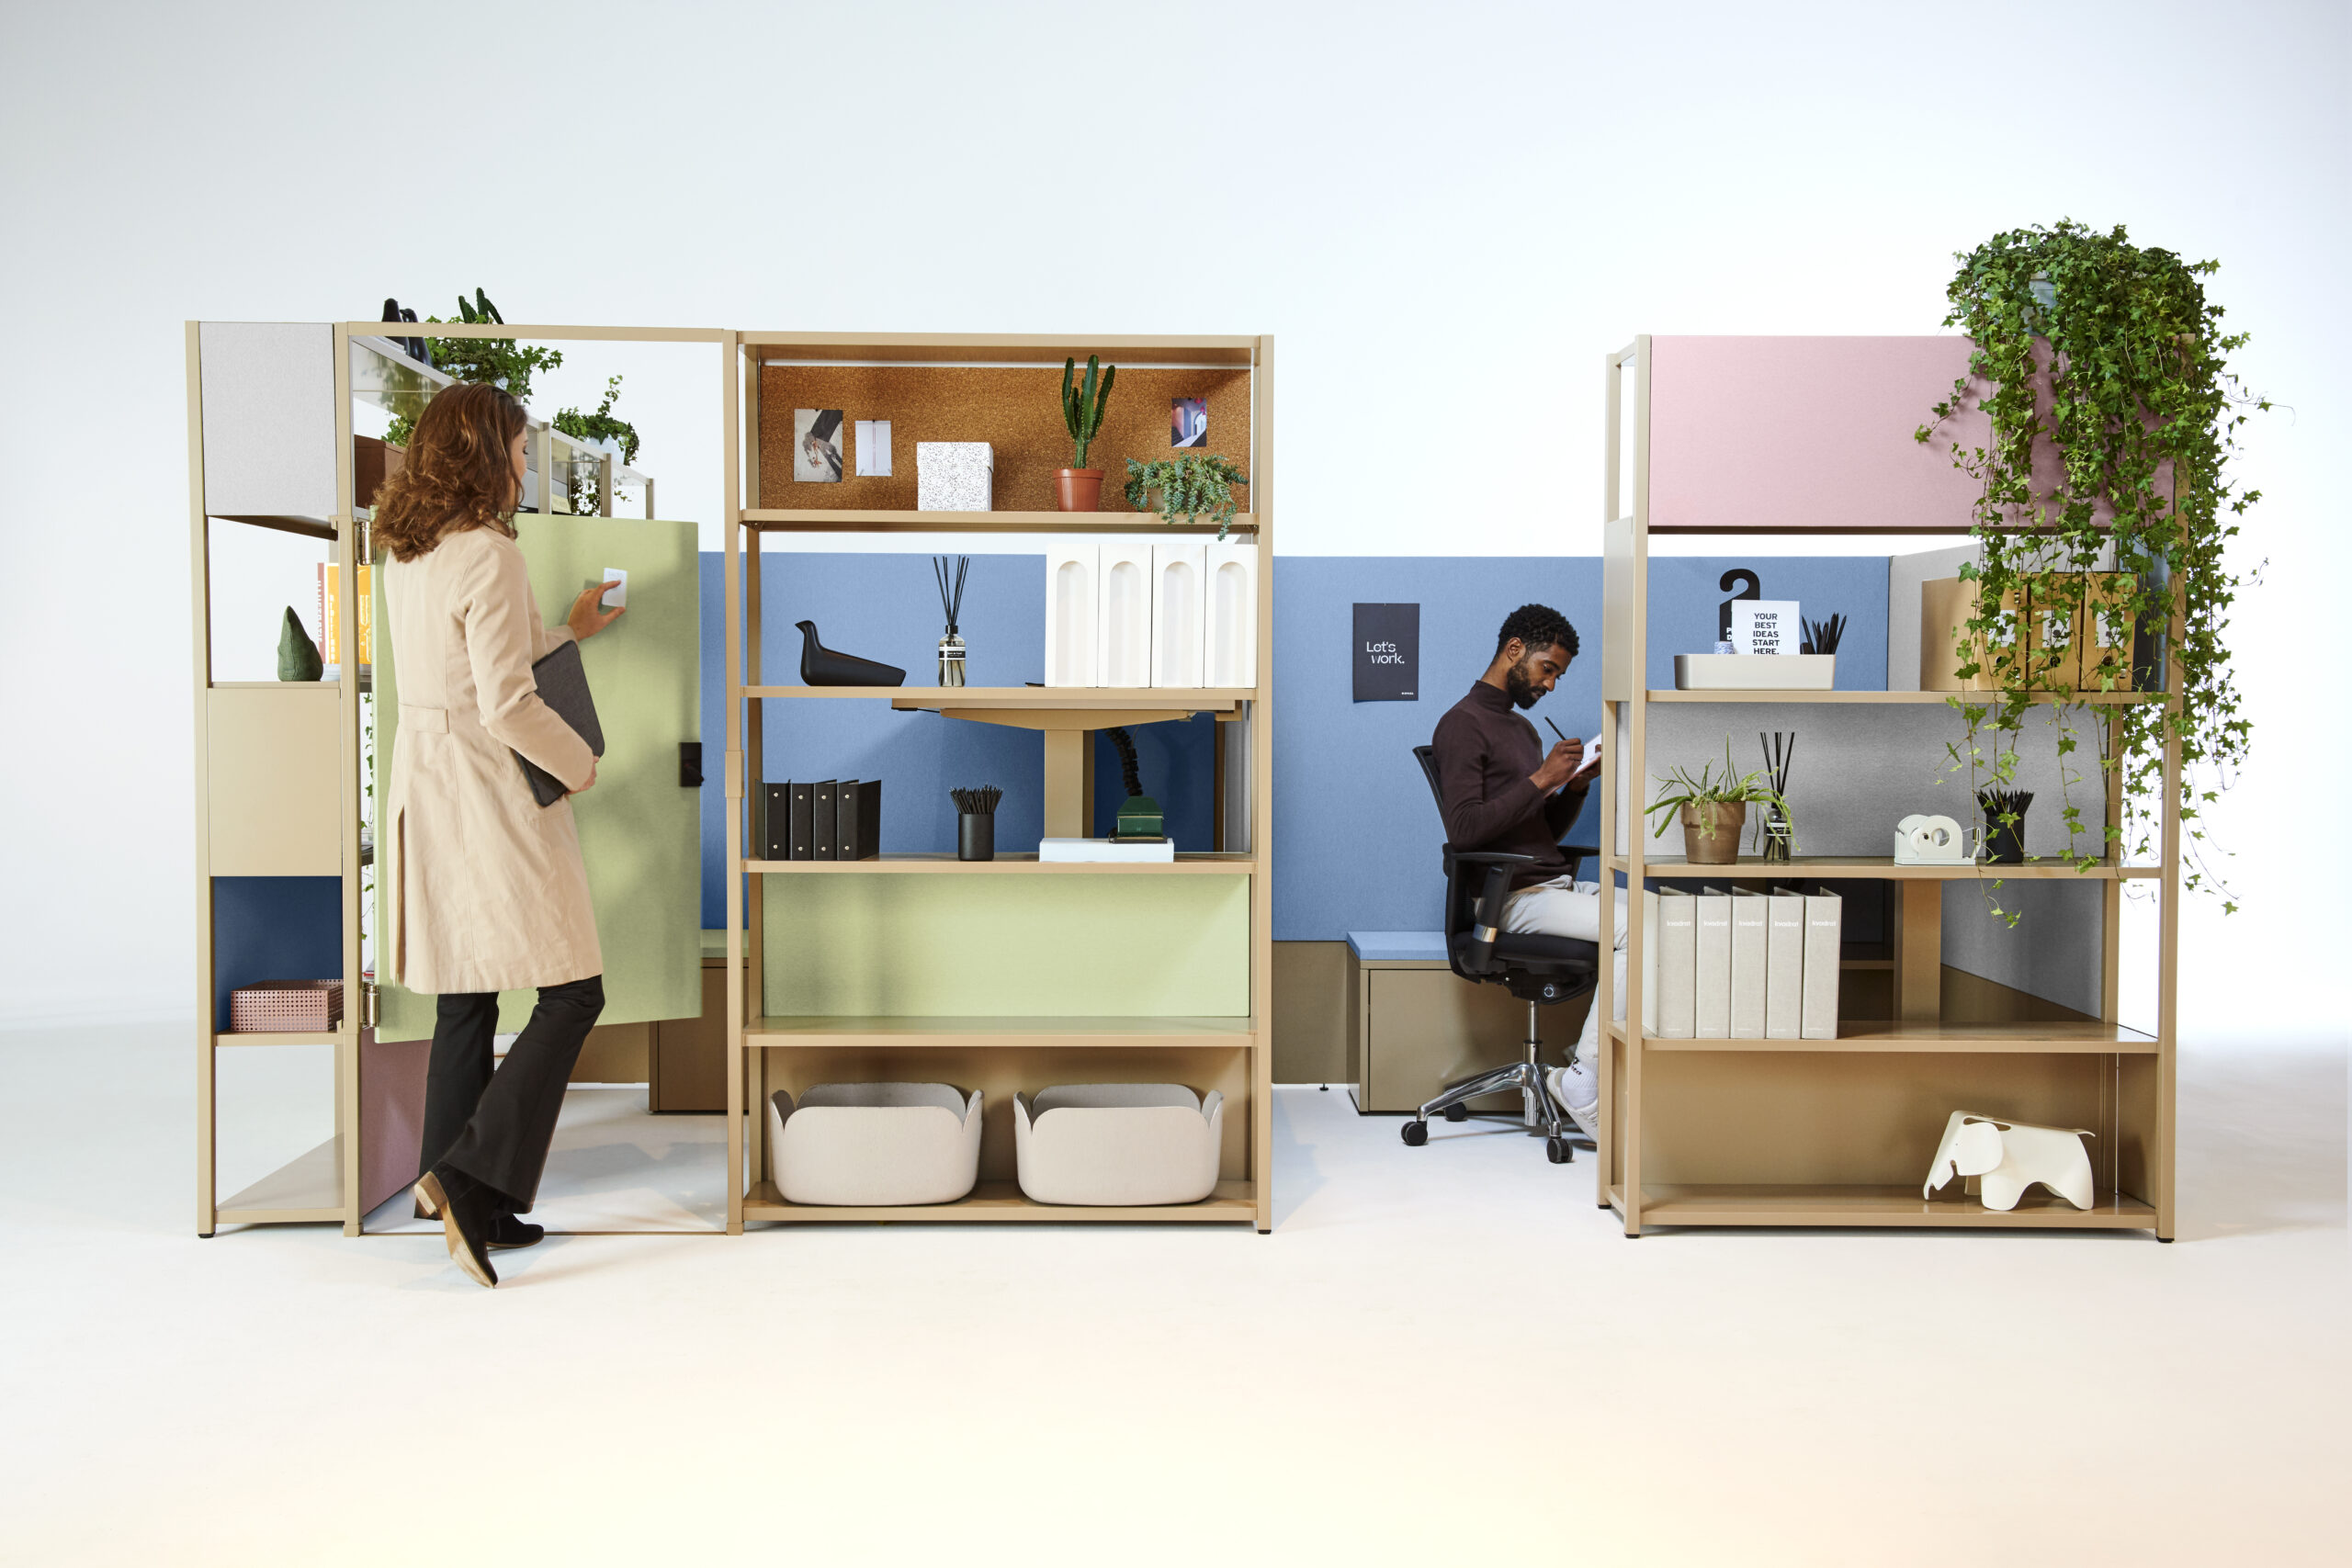 Spaces Open Desk allows for a flexible workspace within the 15 minute city.